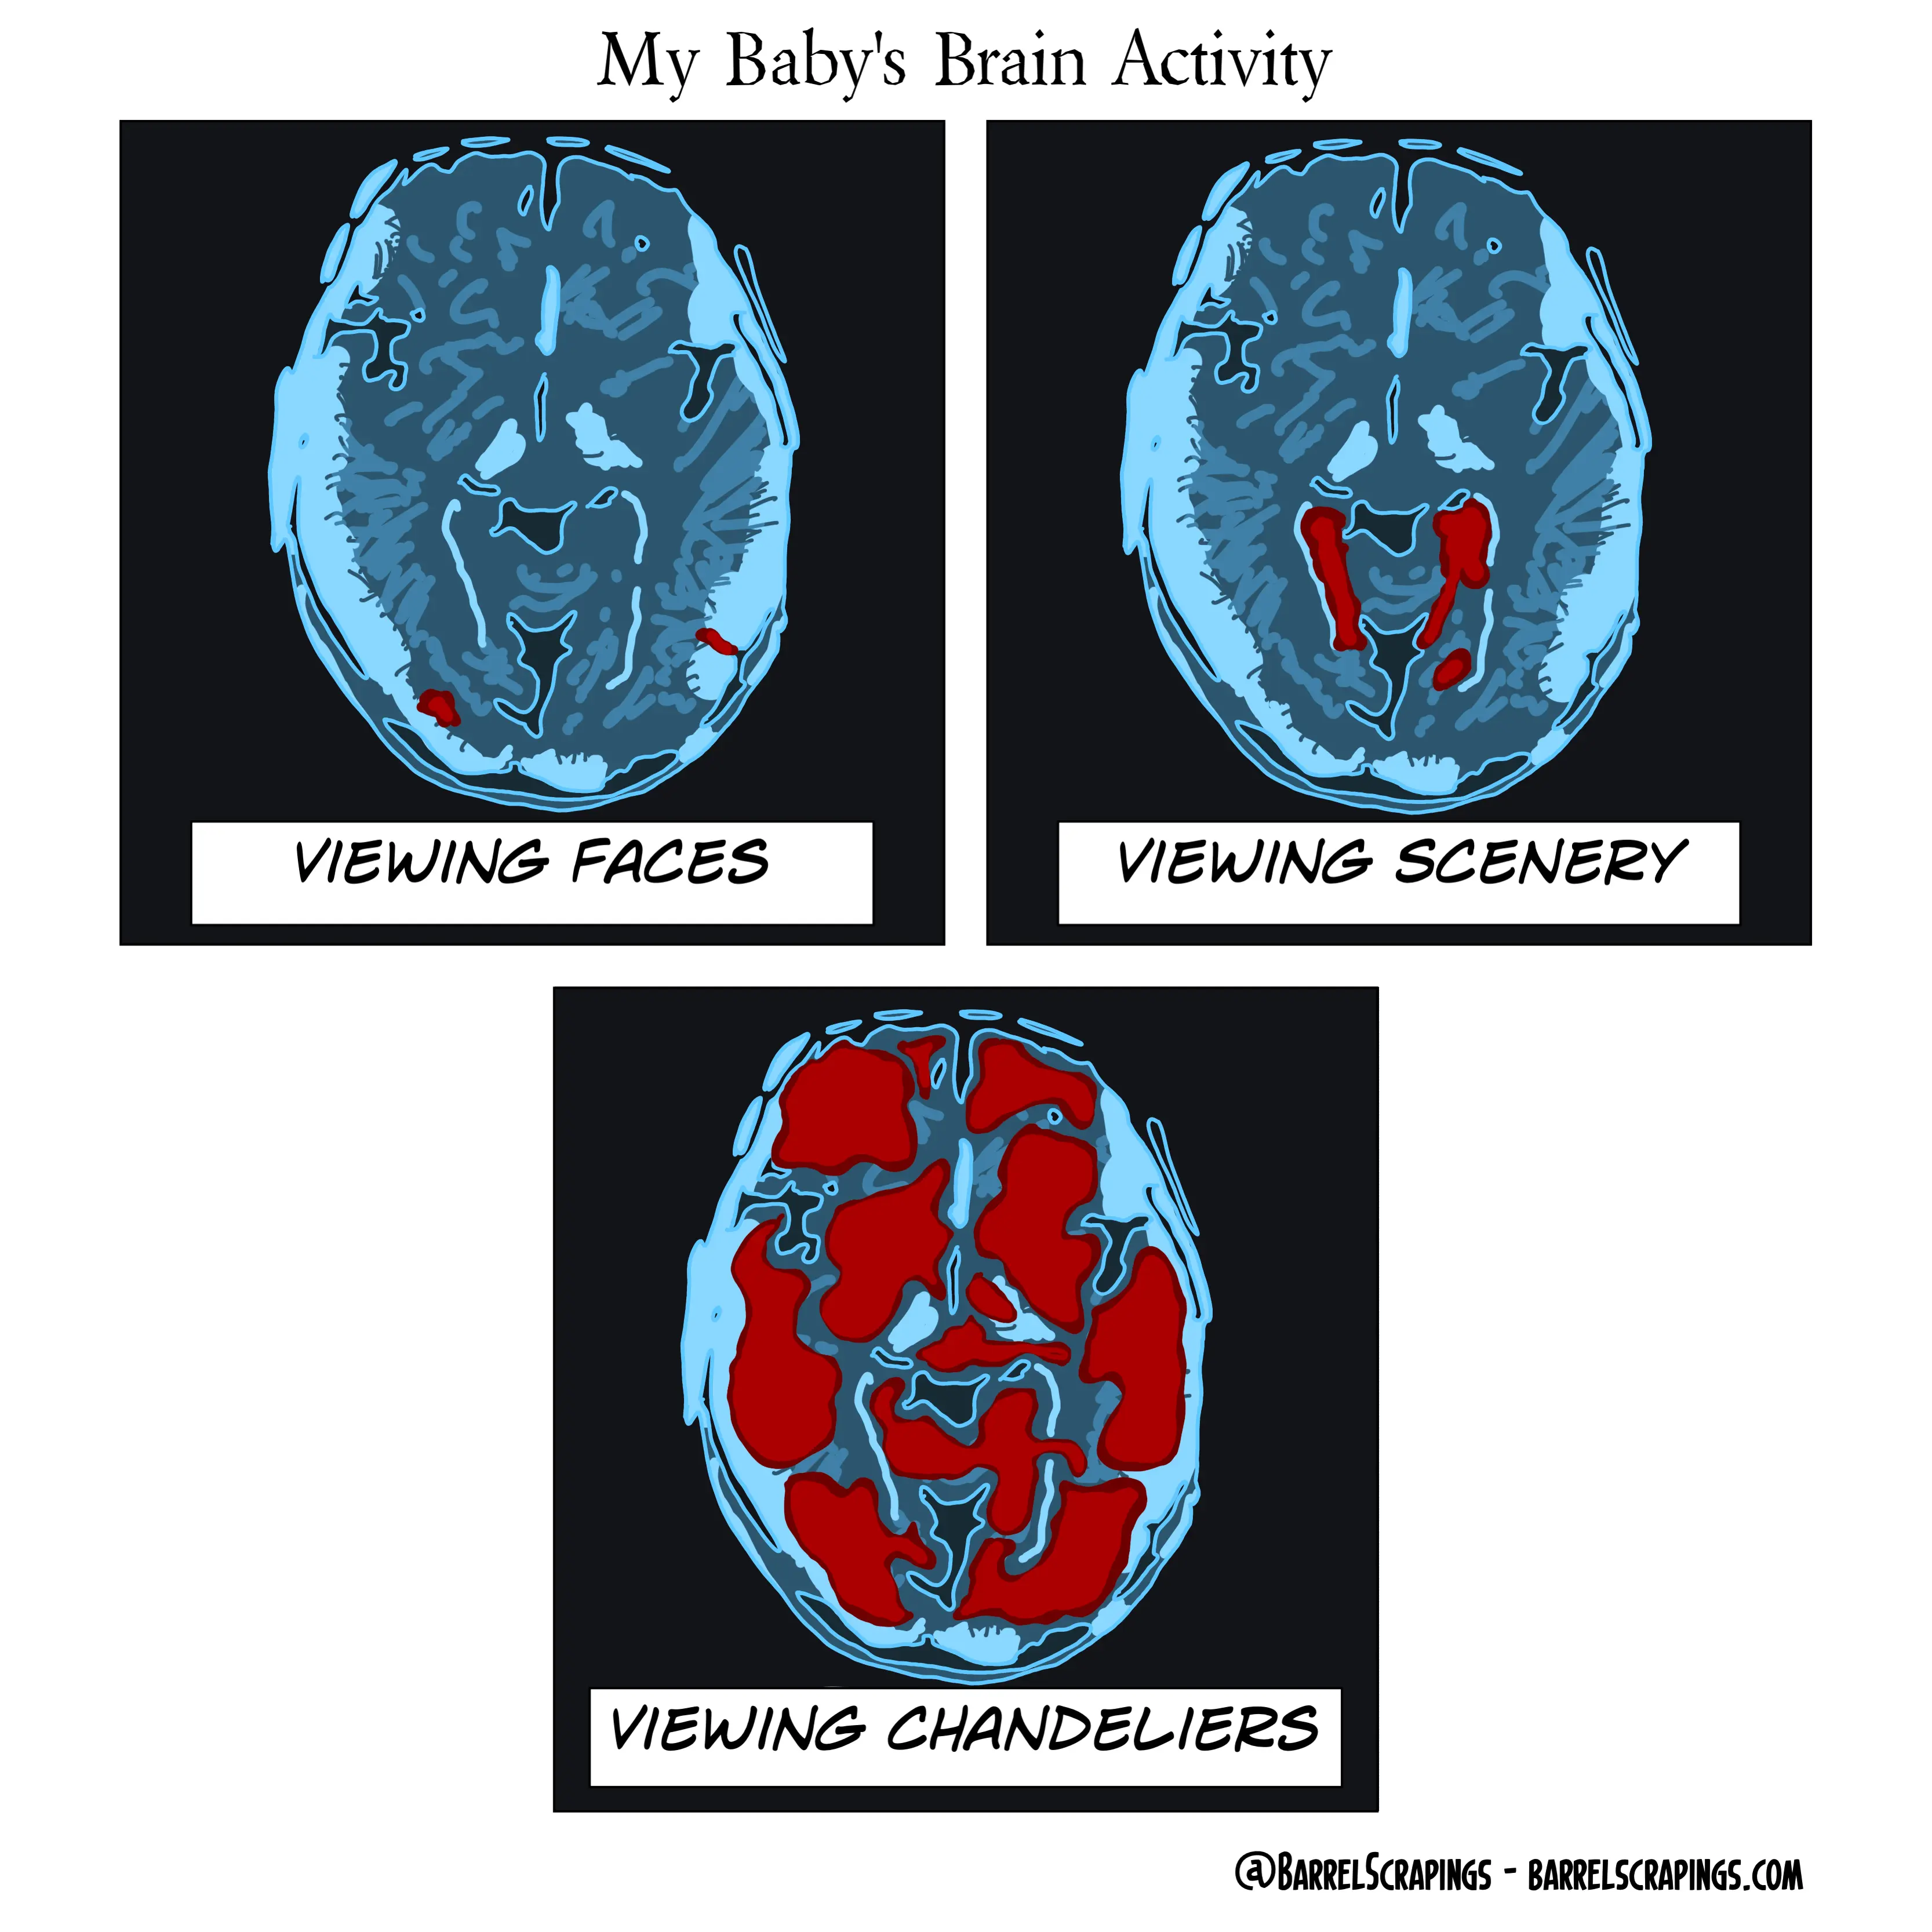 3 brain scans. Scan one, captioned “Viewing faces” - small brain activity. Scan two, captioned “Viewing scenery” - slightly more brain activity. Scan three, captioned “Viewing chandeliers” - huge brain activity.